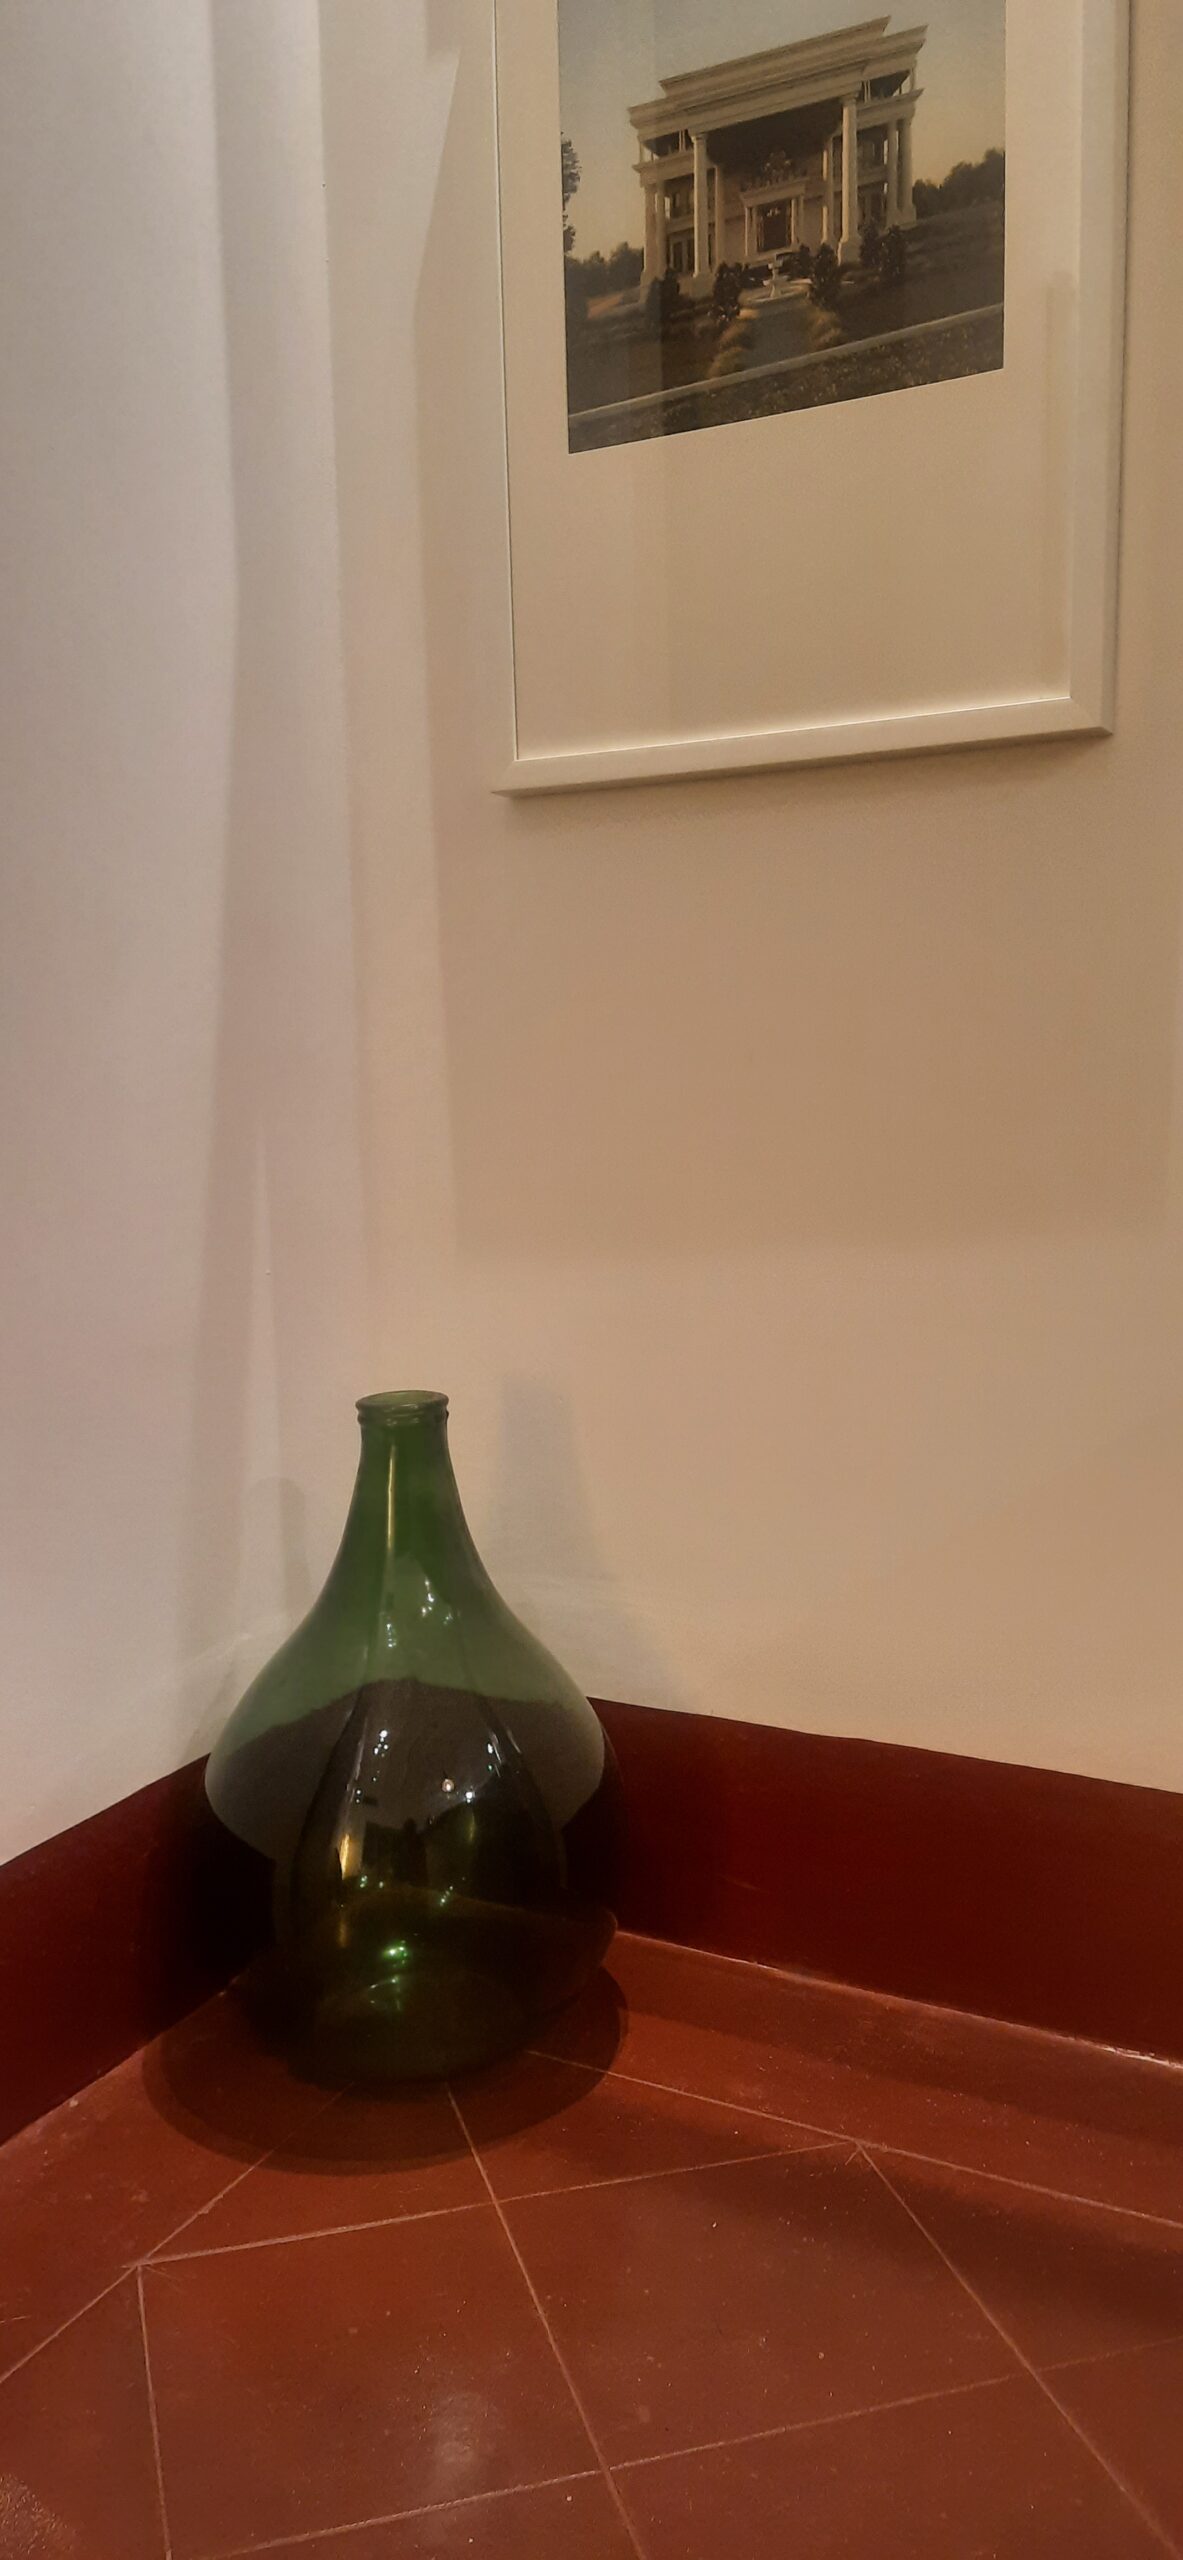 Demijohns in Indian Decor | Vintage large green demijohn at the corner of the room